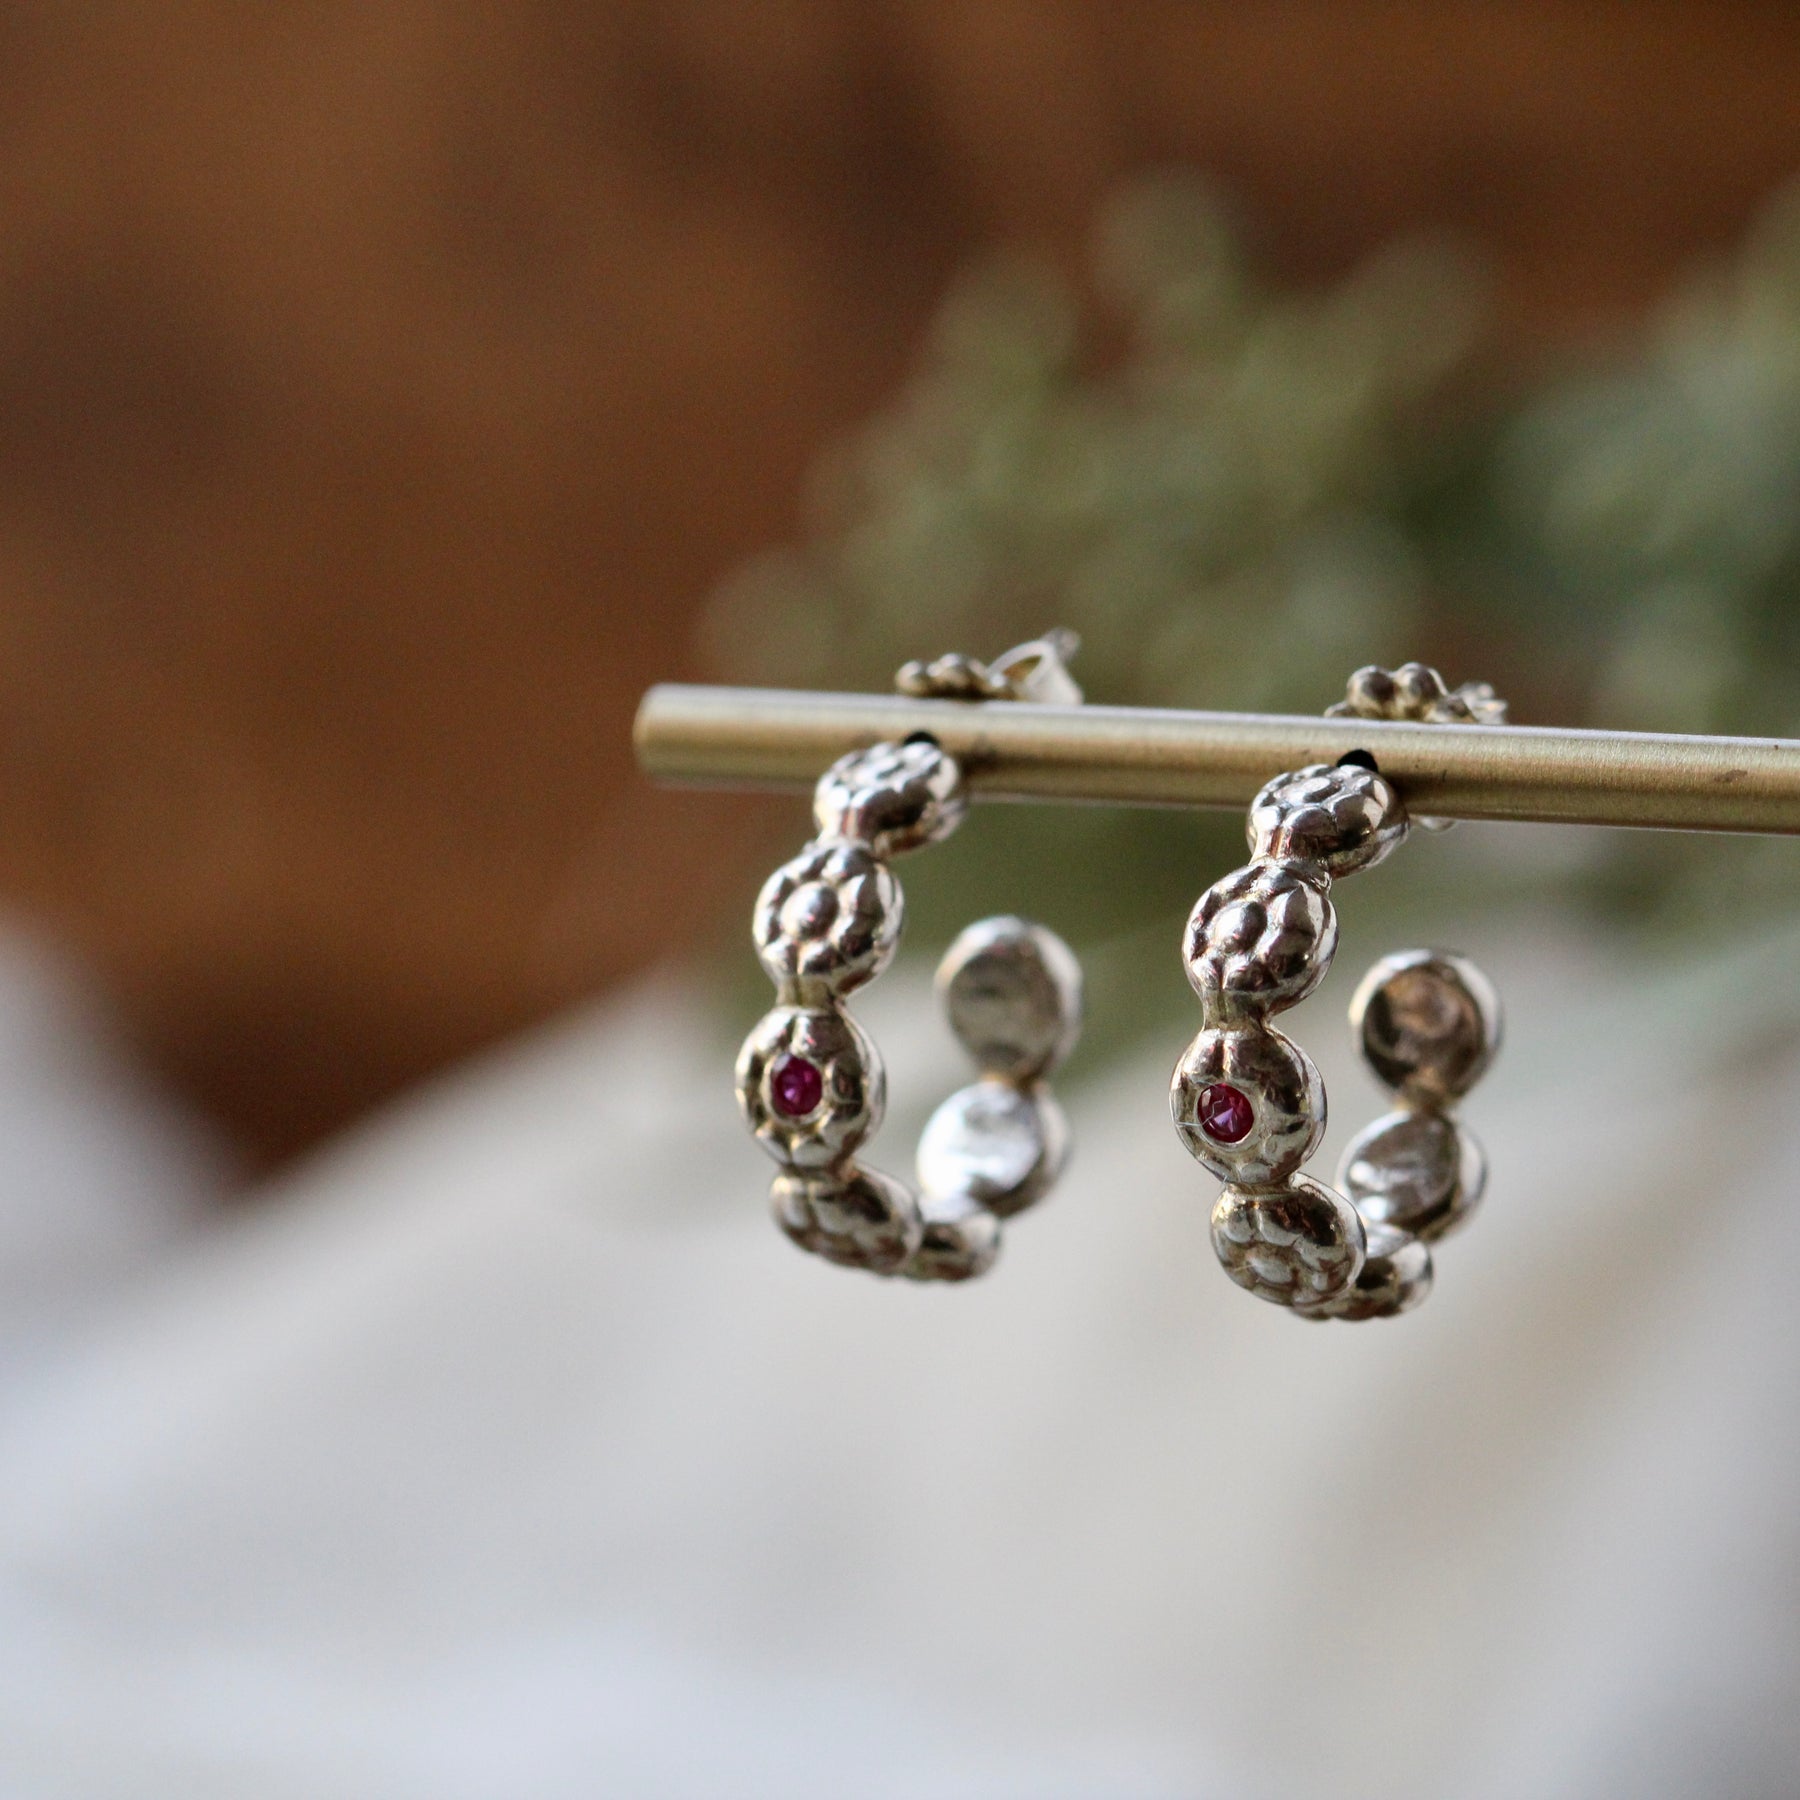 Clearance Sale floral pattern sterling silver hoop earrings with flush set rubies